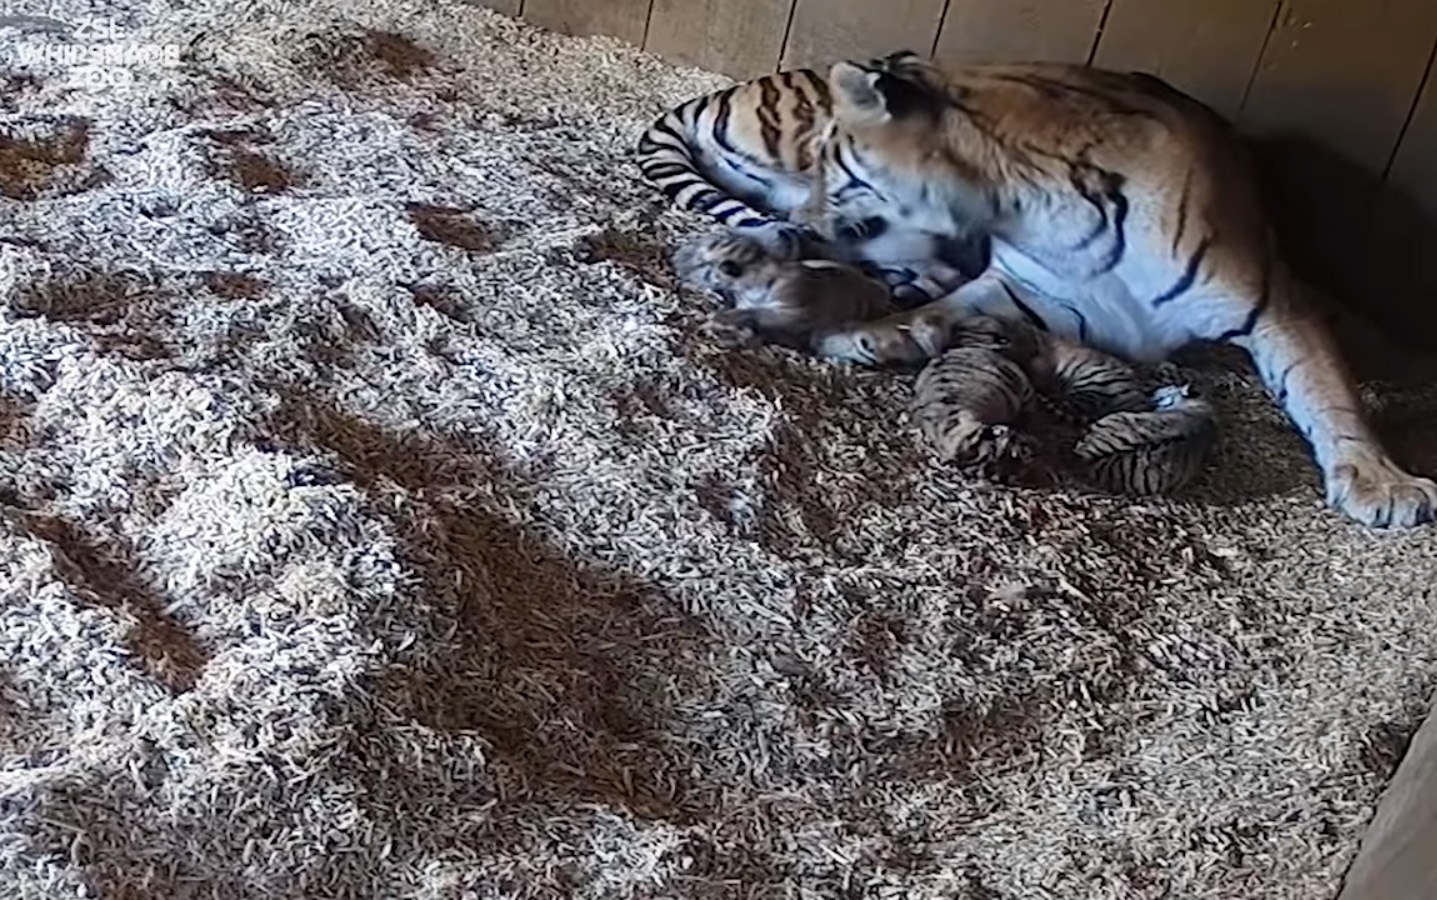 Tiger Cubs at Whipsnade Zoo